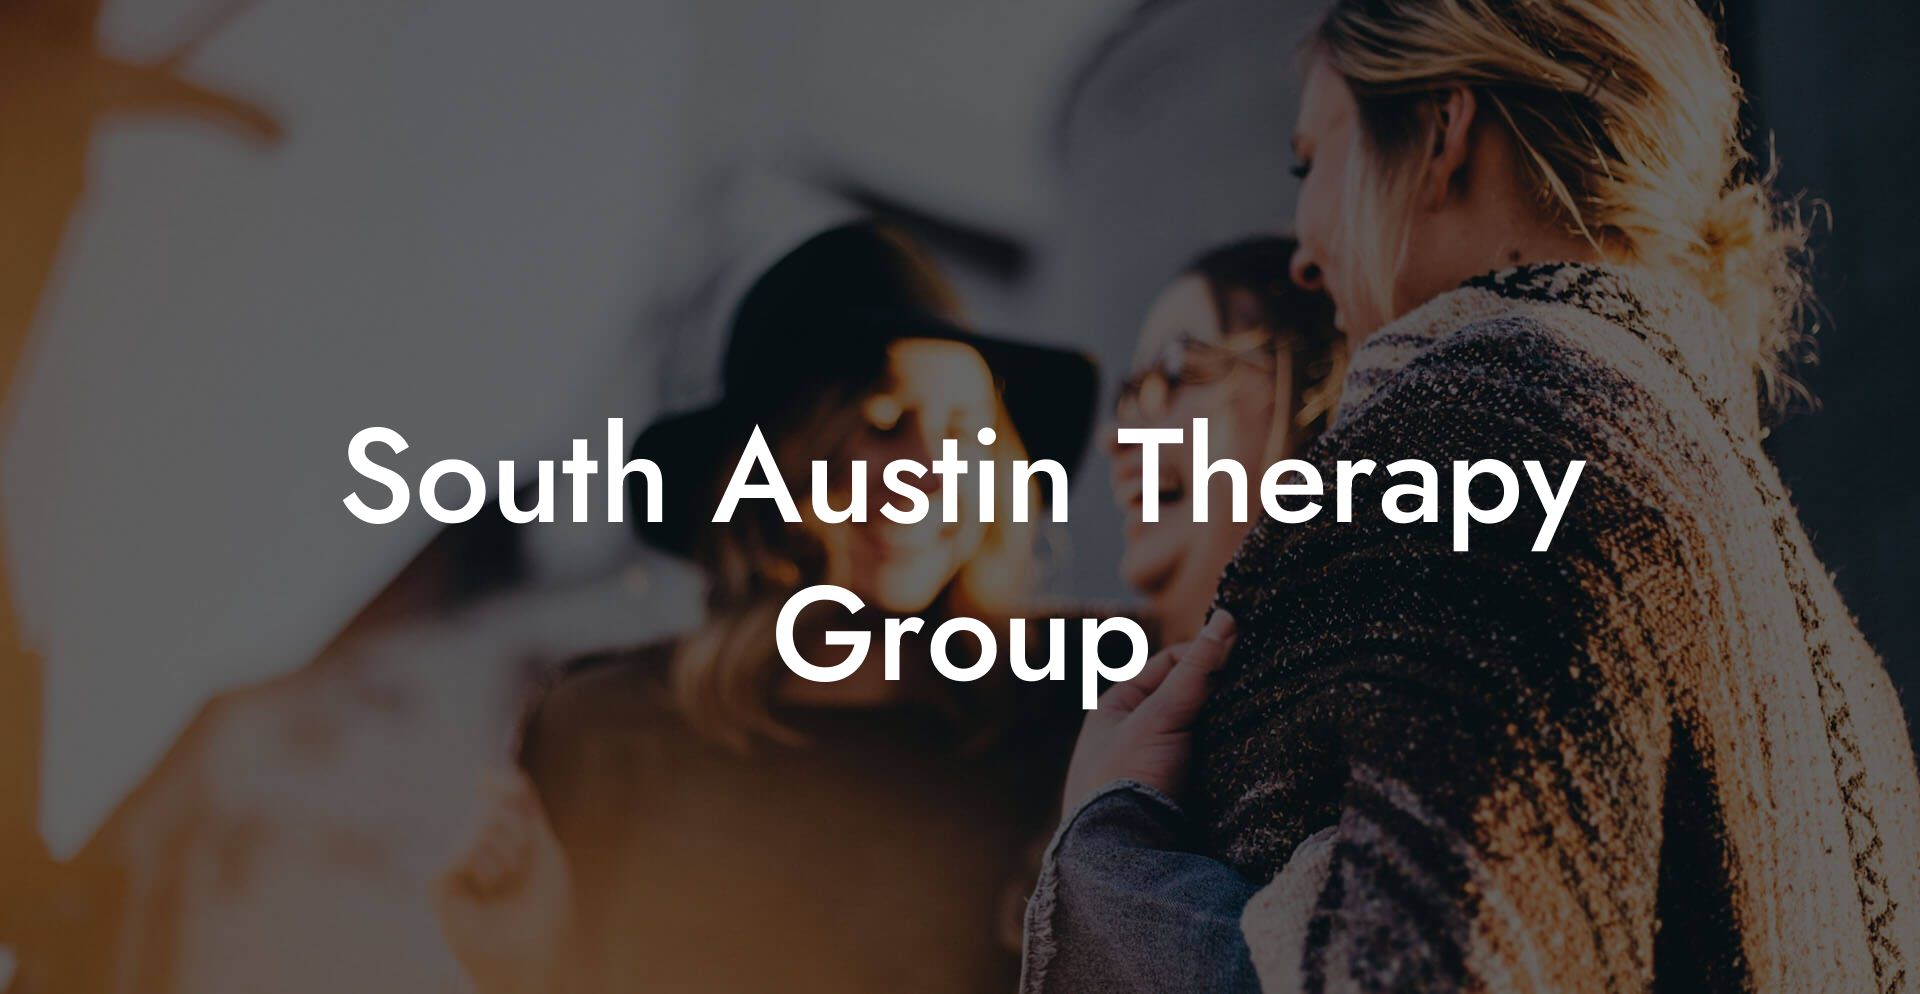 South Austin Therapy Group